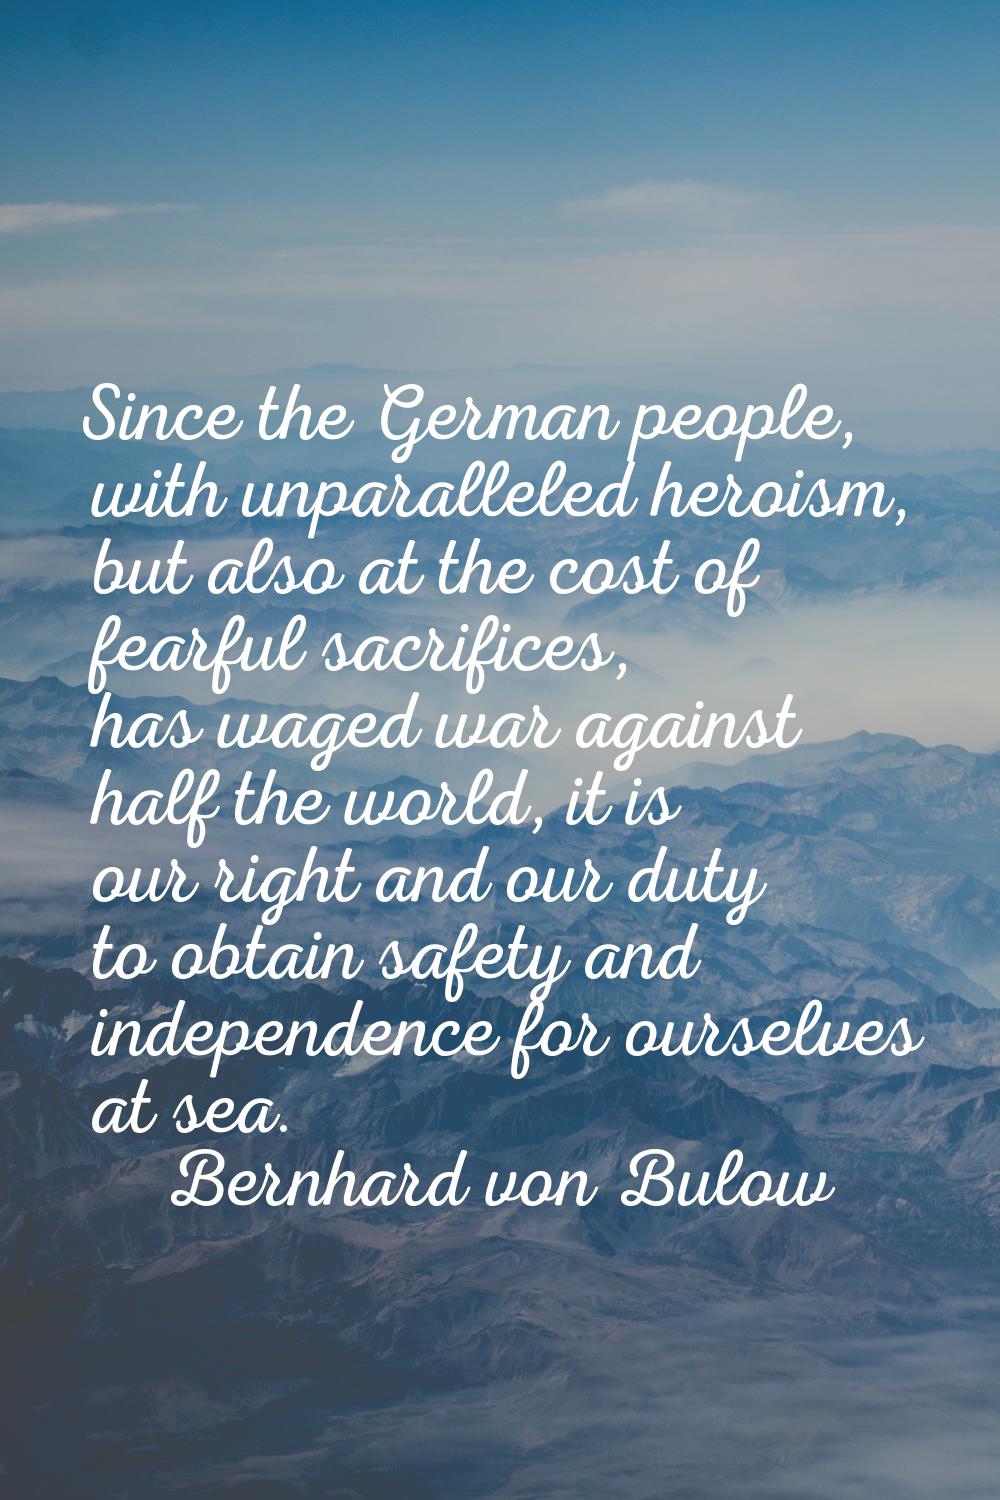 Since the German people, with unparalleled heroism, but also at the cost of fearful sacrifices, has